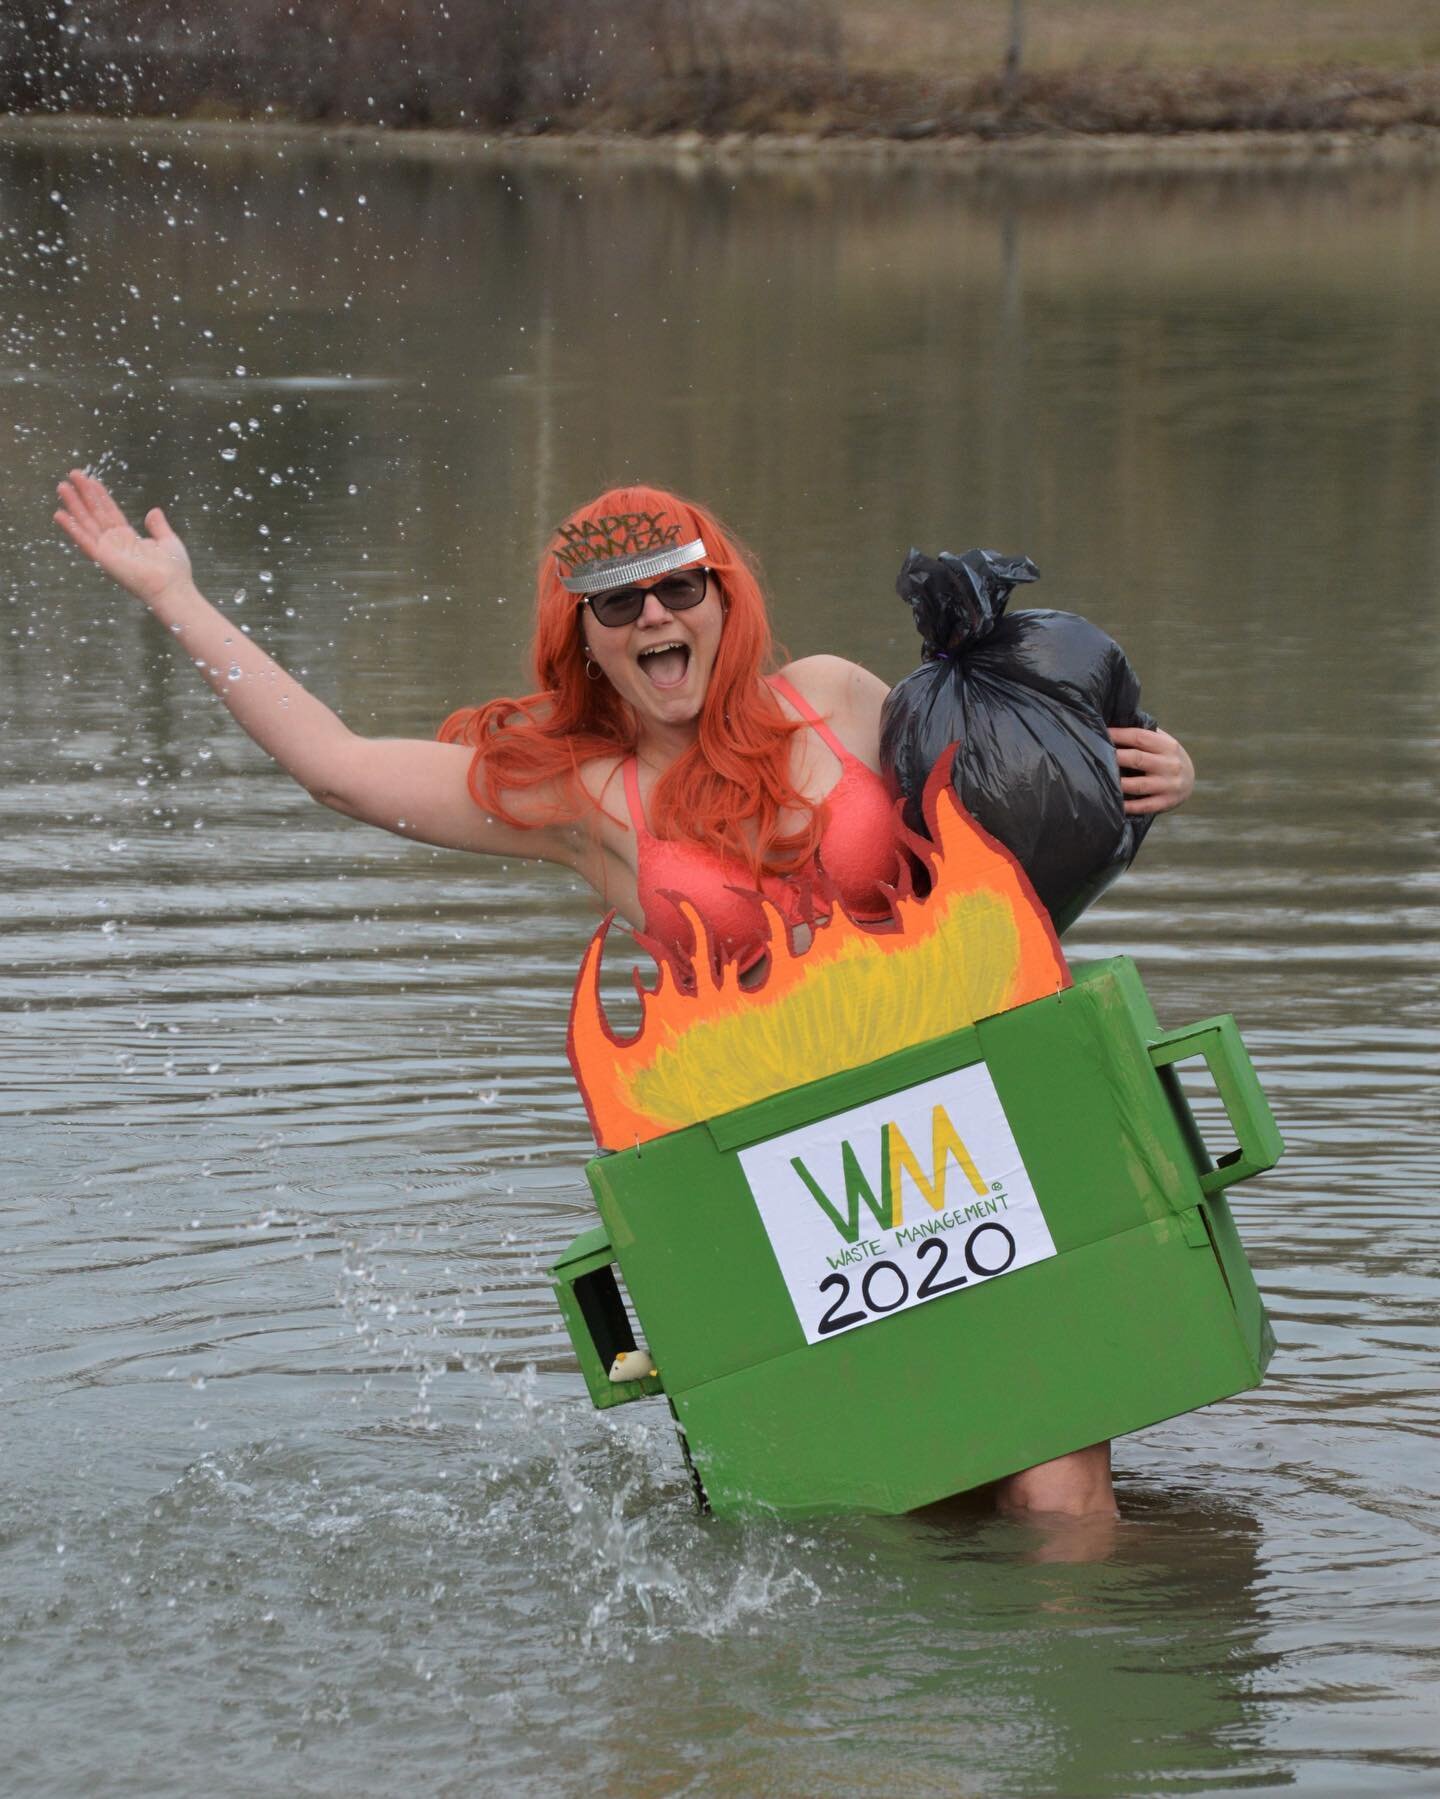 Congratulations to Tammy Fracking, &ldquo;Dumpster Fire 2020&rdquo; winner of the solo costume contest at the virtual Courage #PolarBearDip! Tammy has won an Acer Aspire 3 Laptop provided by Shoppers Drug Mart- Dundas and Third Line, Oakville. 💻 Con